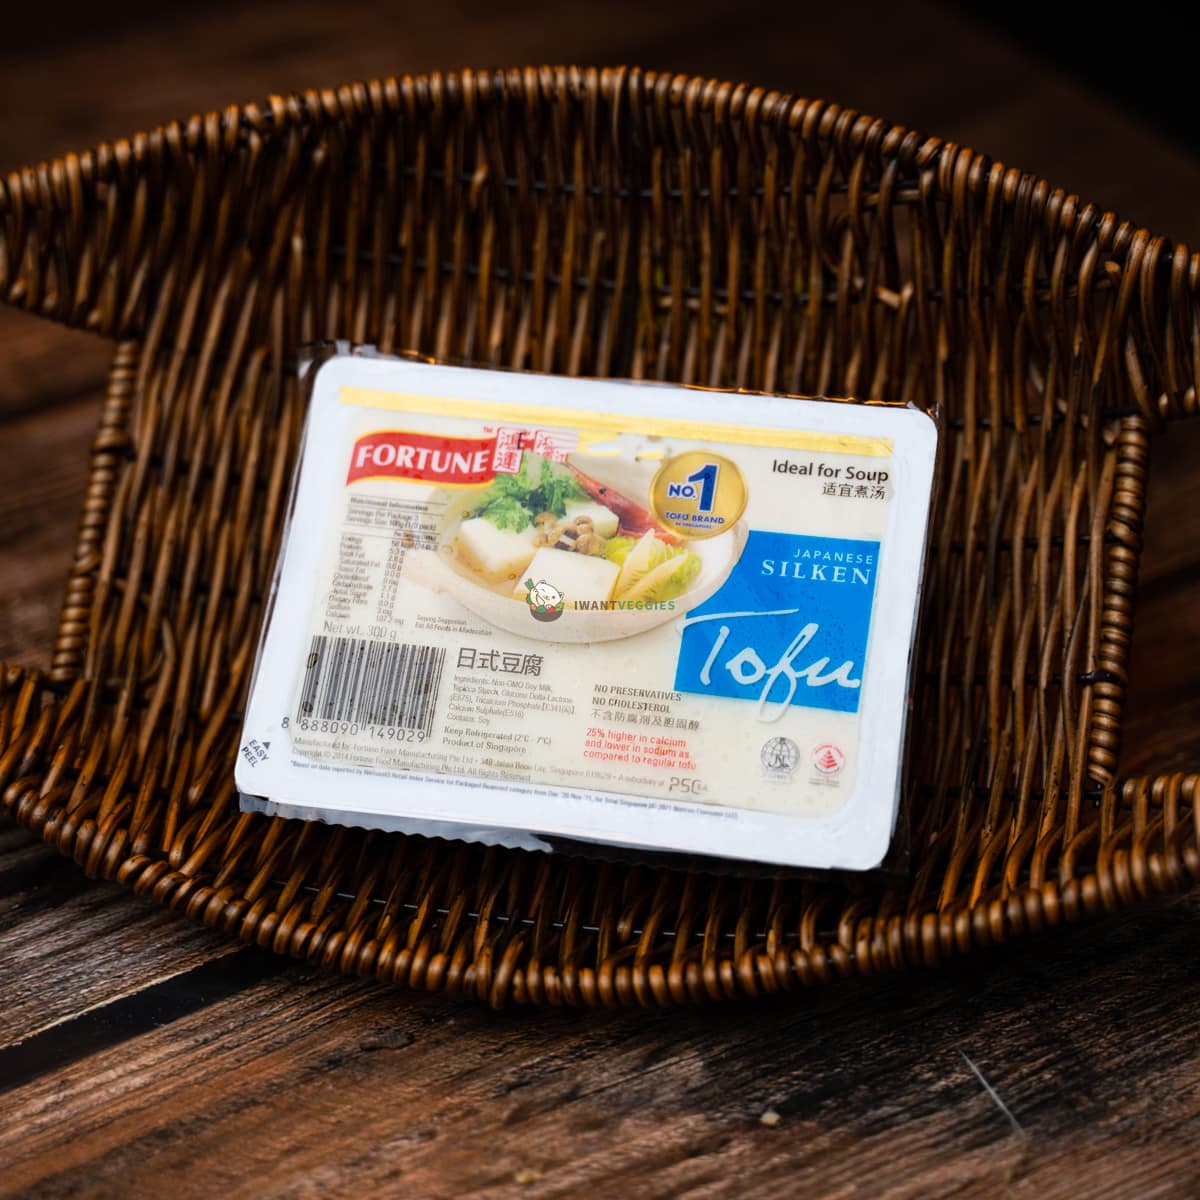 A packet of Fortune silken tofu on a wooden basket. Soft, creamy, and white.